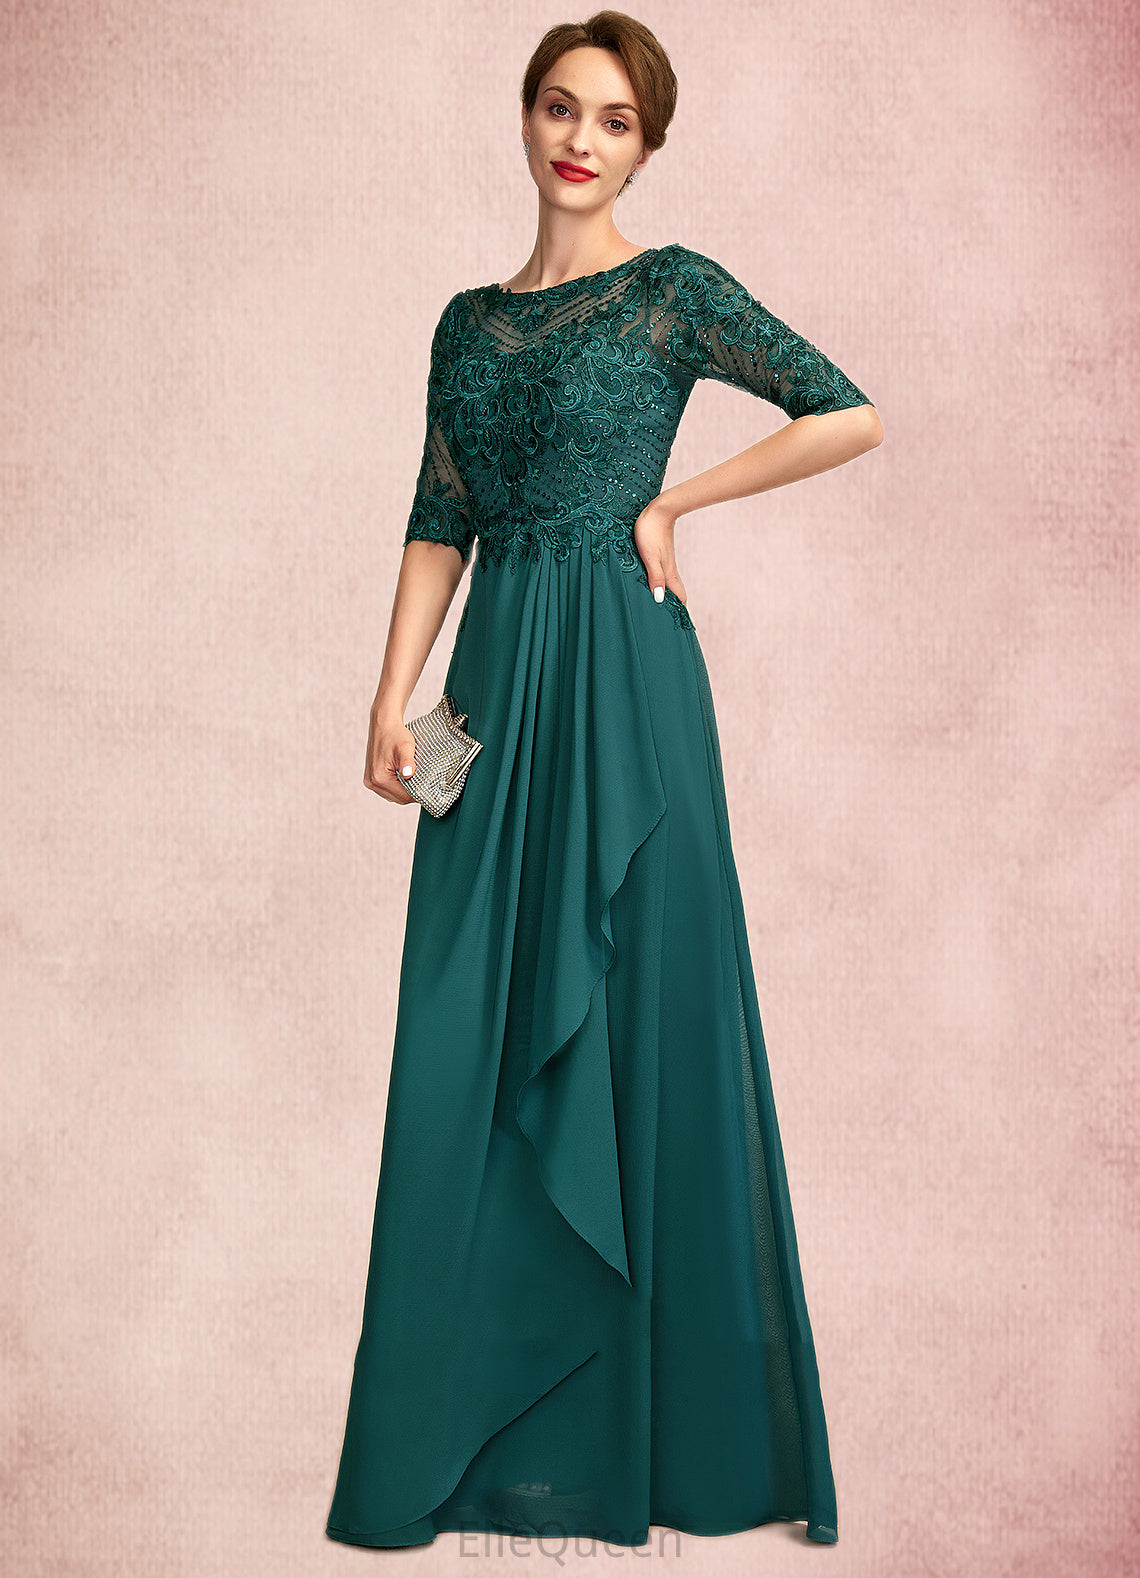 Brittany A-Line Scoop Neck Floor-Length Chiffon Lace Mother of the Bride Dress With Beading Sequins Cascading Ruffles DG126P0015027